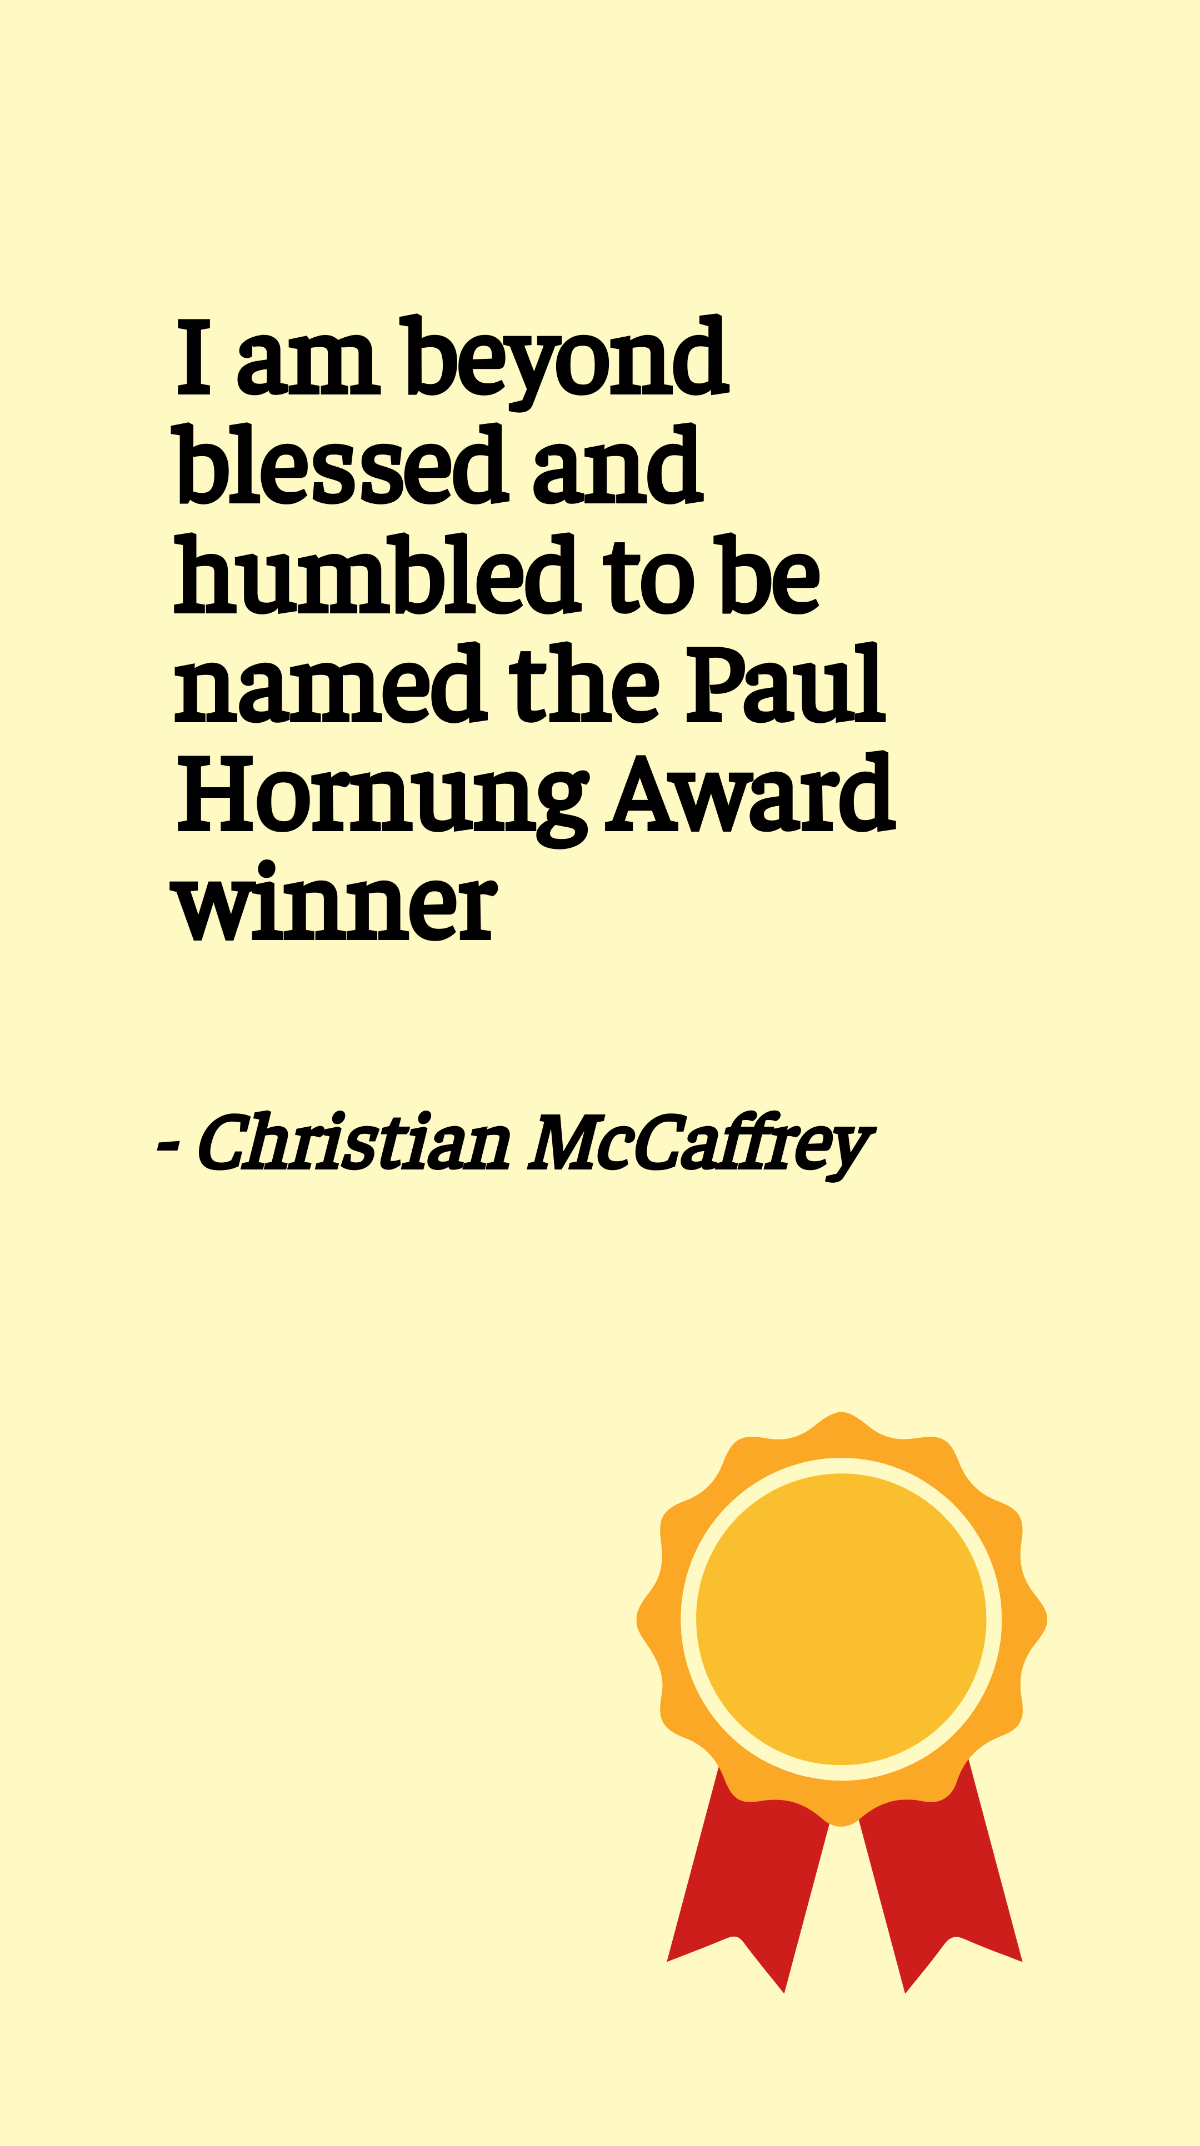 Free Christian McCaffrey - I am beyond blessed and humbled to be named the Paul Hornung Award winner Template